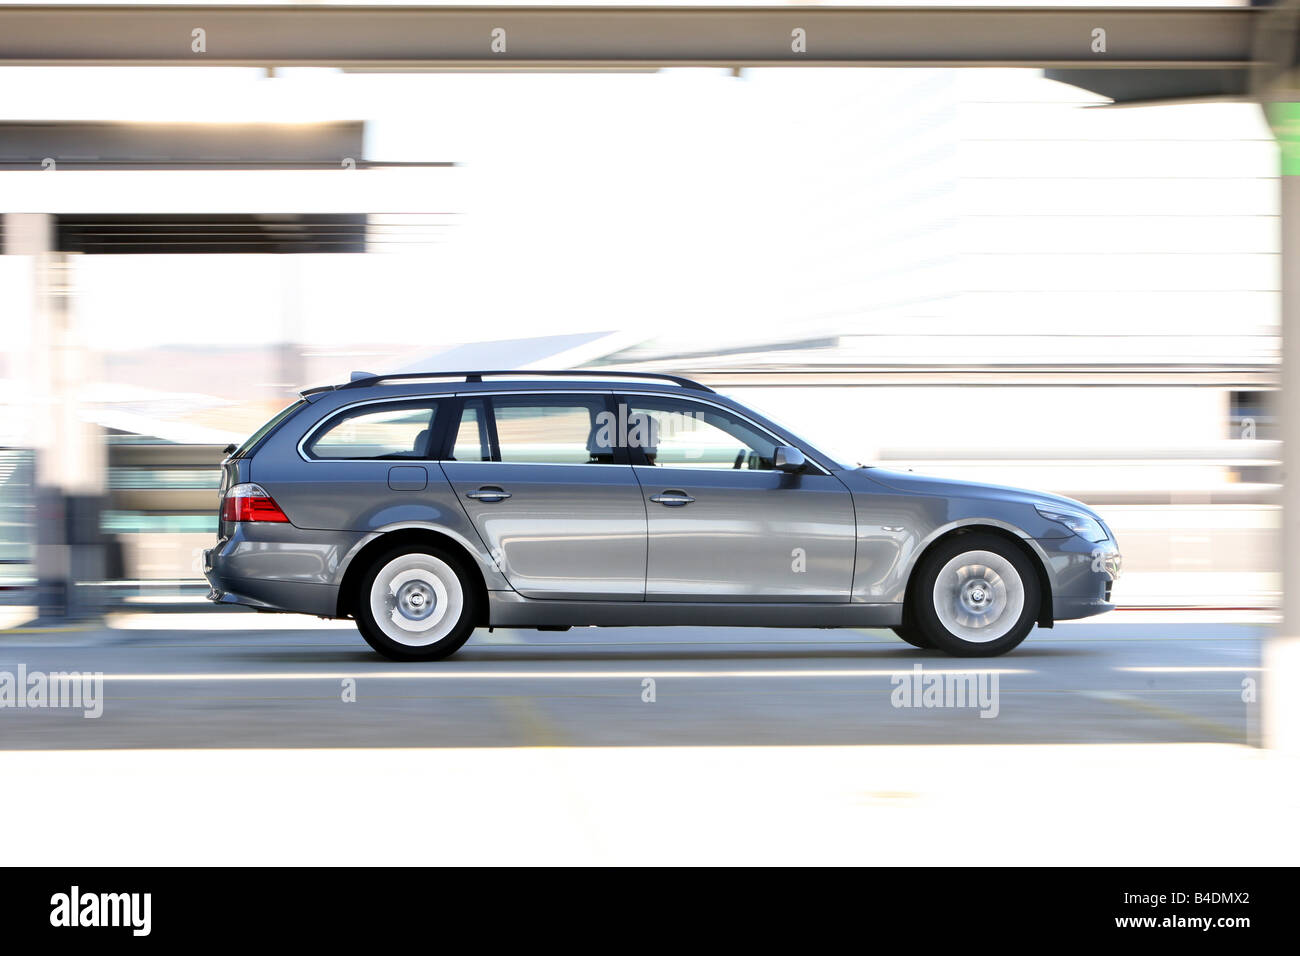 BMW 520d Touring, model year 2006-, anthracite, driving, side view, City Stock Photo